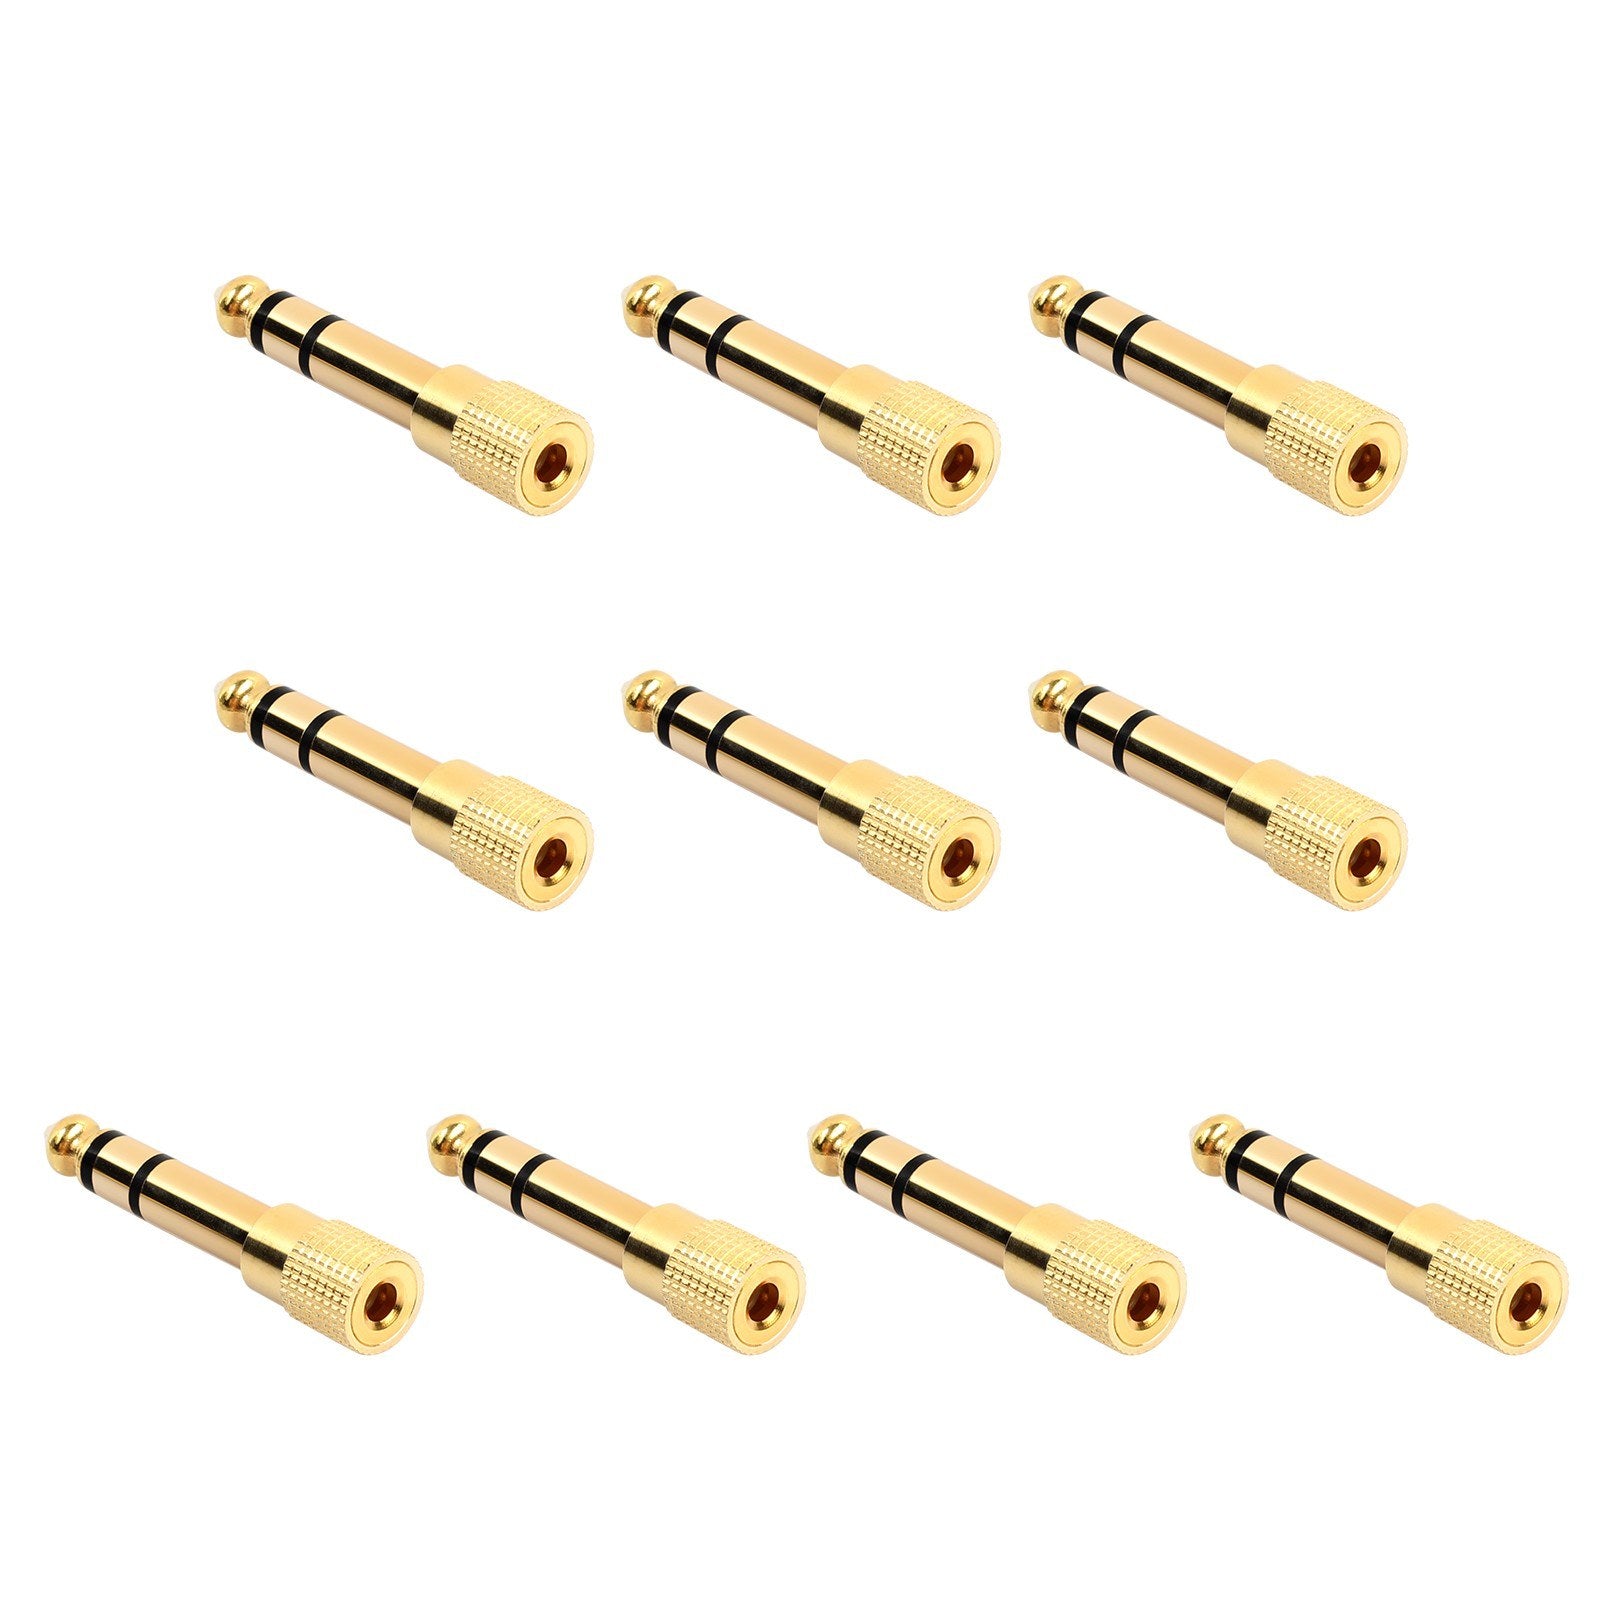 10Pcs 6.35mm 1/4inch Male to 3.5mm 1/8inch Female Stereo Headphone Audio Adapter Gold Plated Headphone Jack Plug for Amp Guitar Mixer